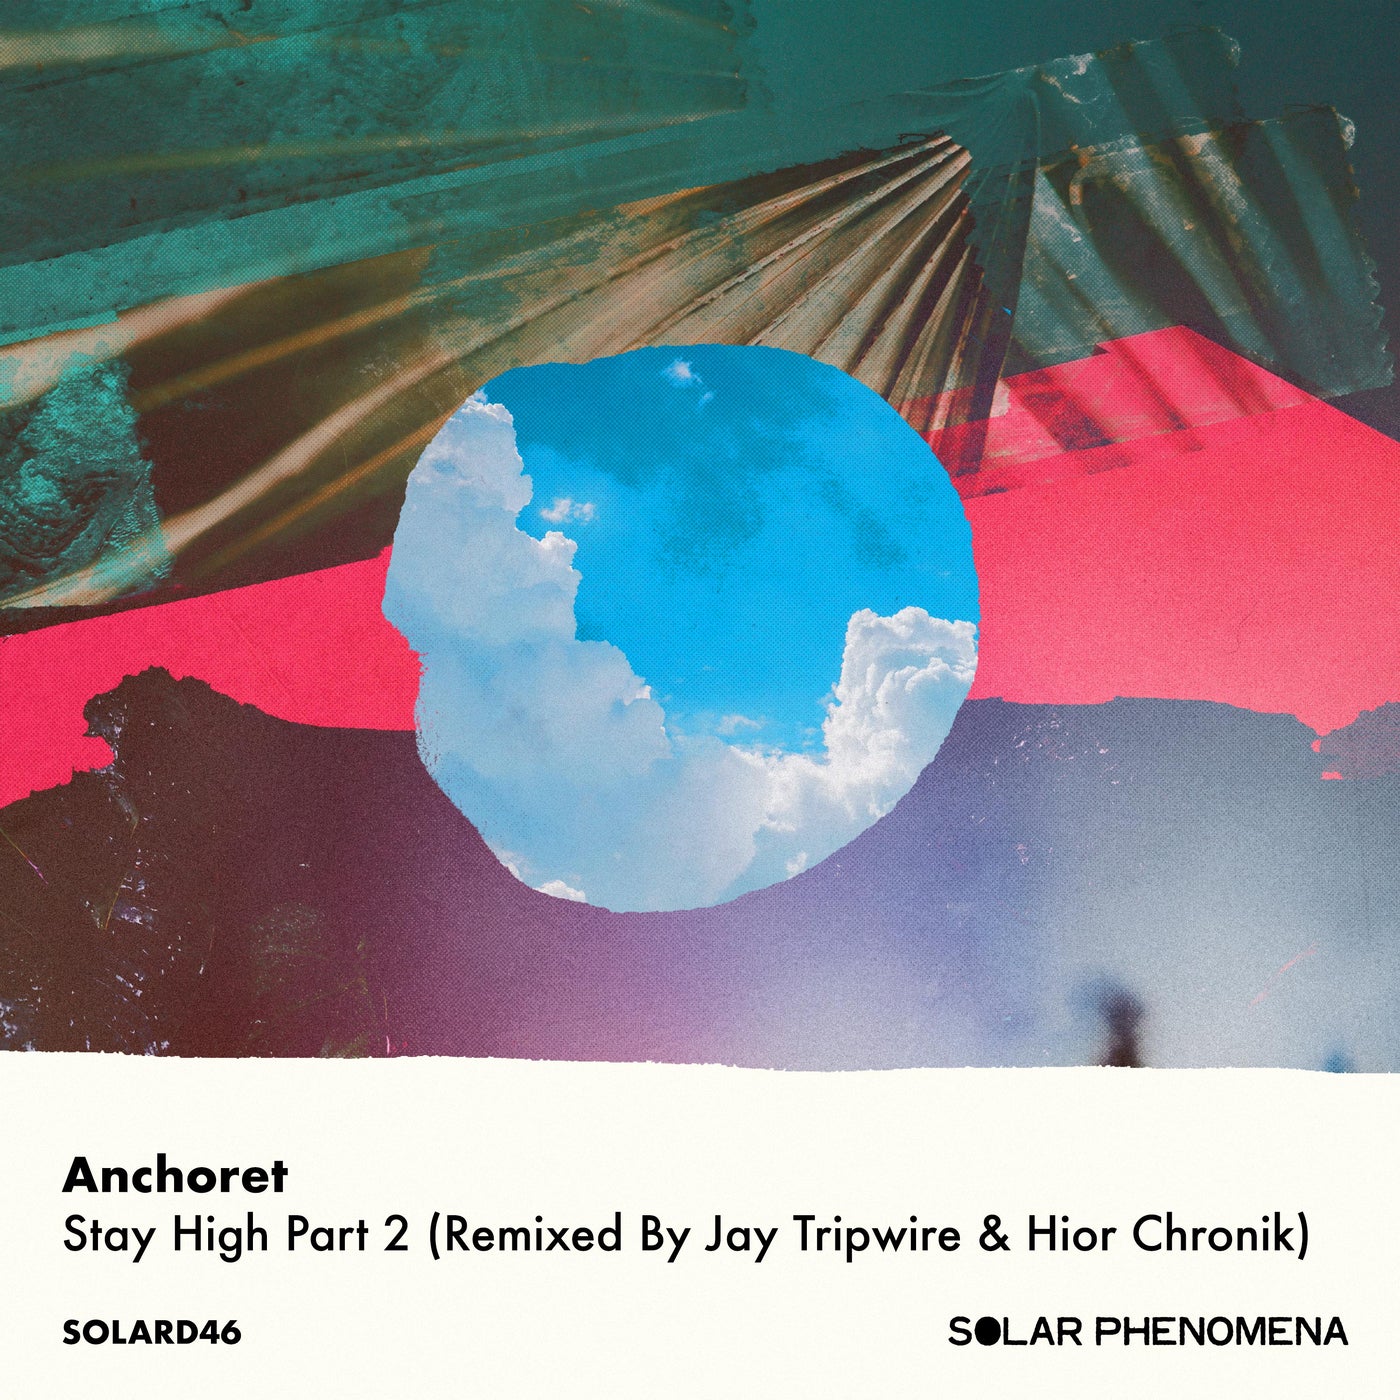 Stay High Part 2 (Remixed By Jay Tripwire & Hior Chronik)